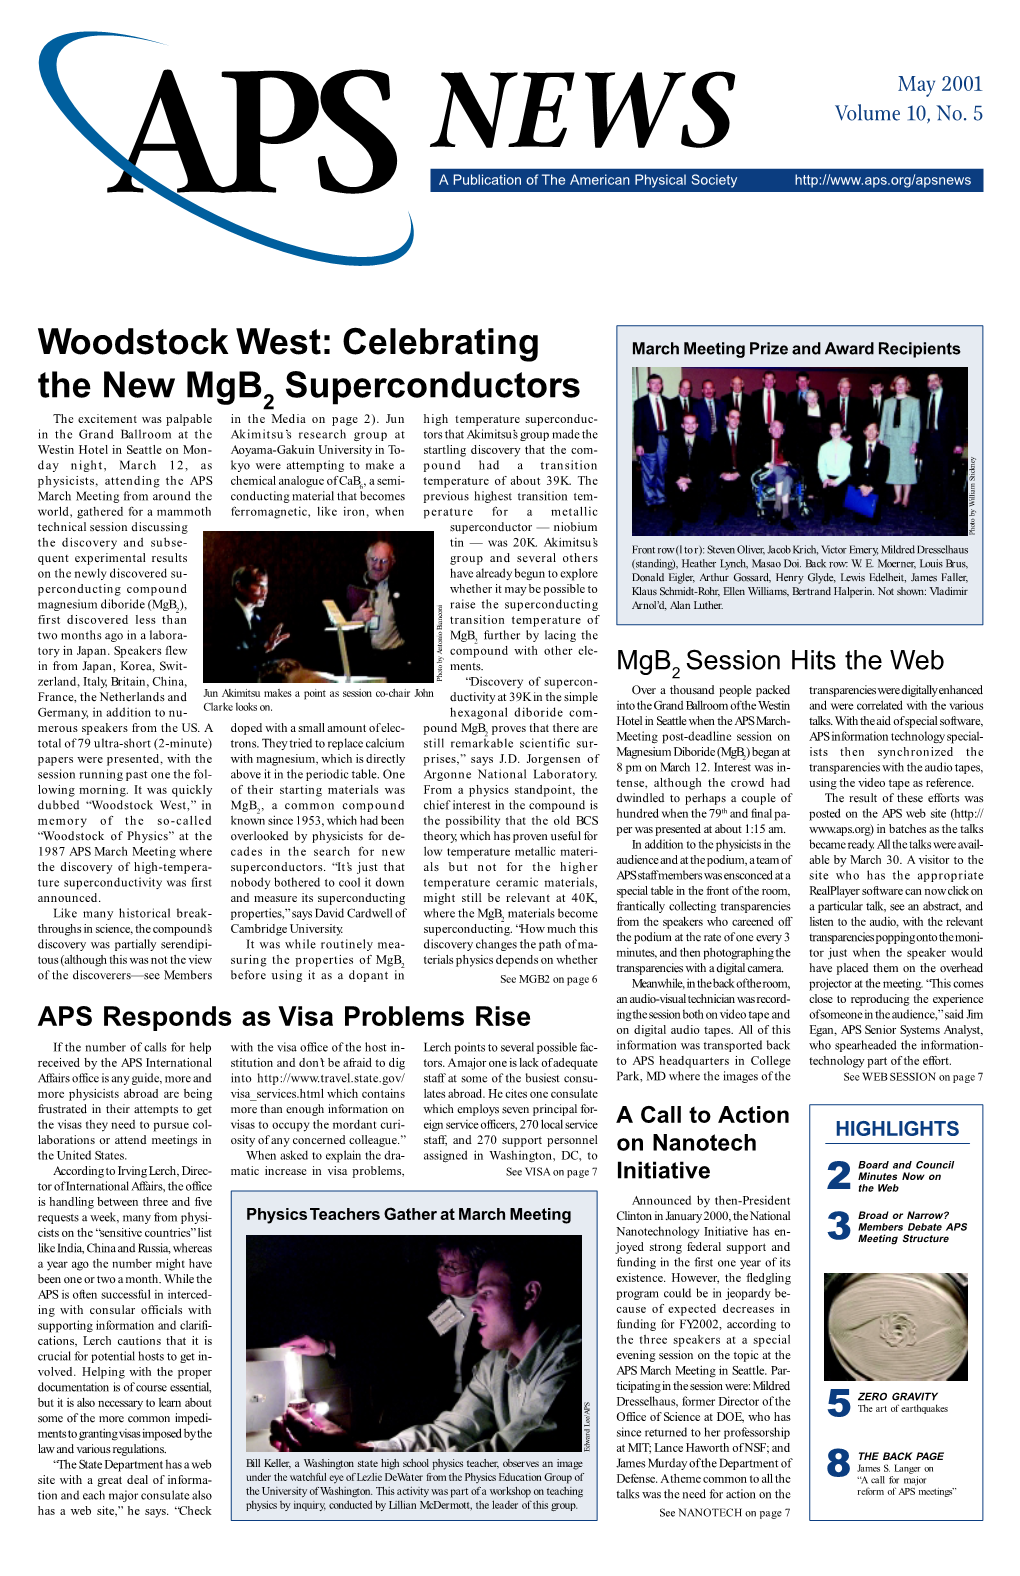 Woodstock West: Celebrating the New Mgb Superconductors